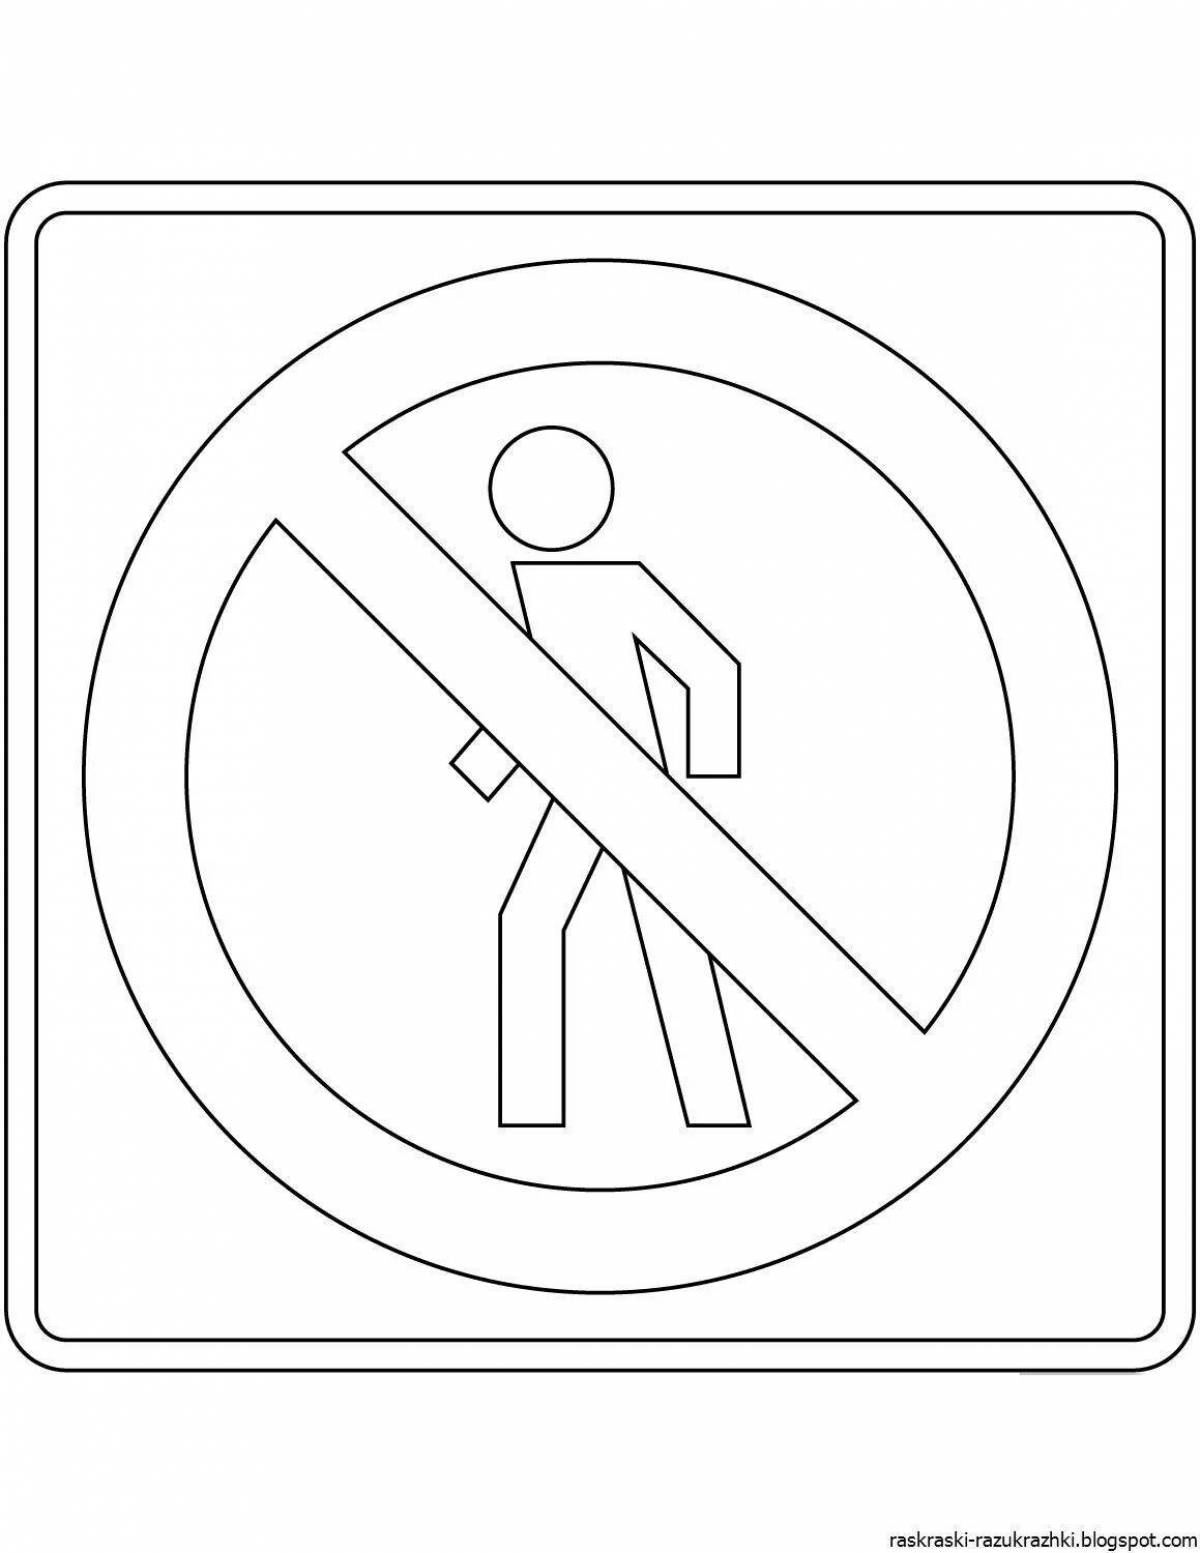 Playful traffic sign coloring page